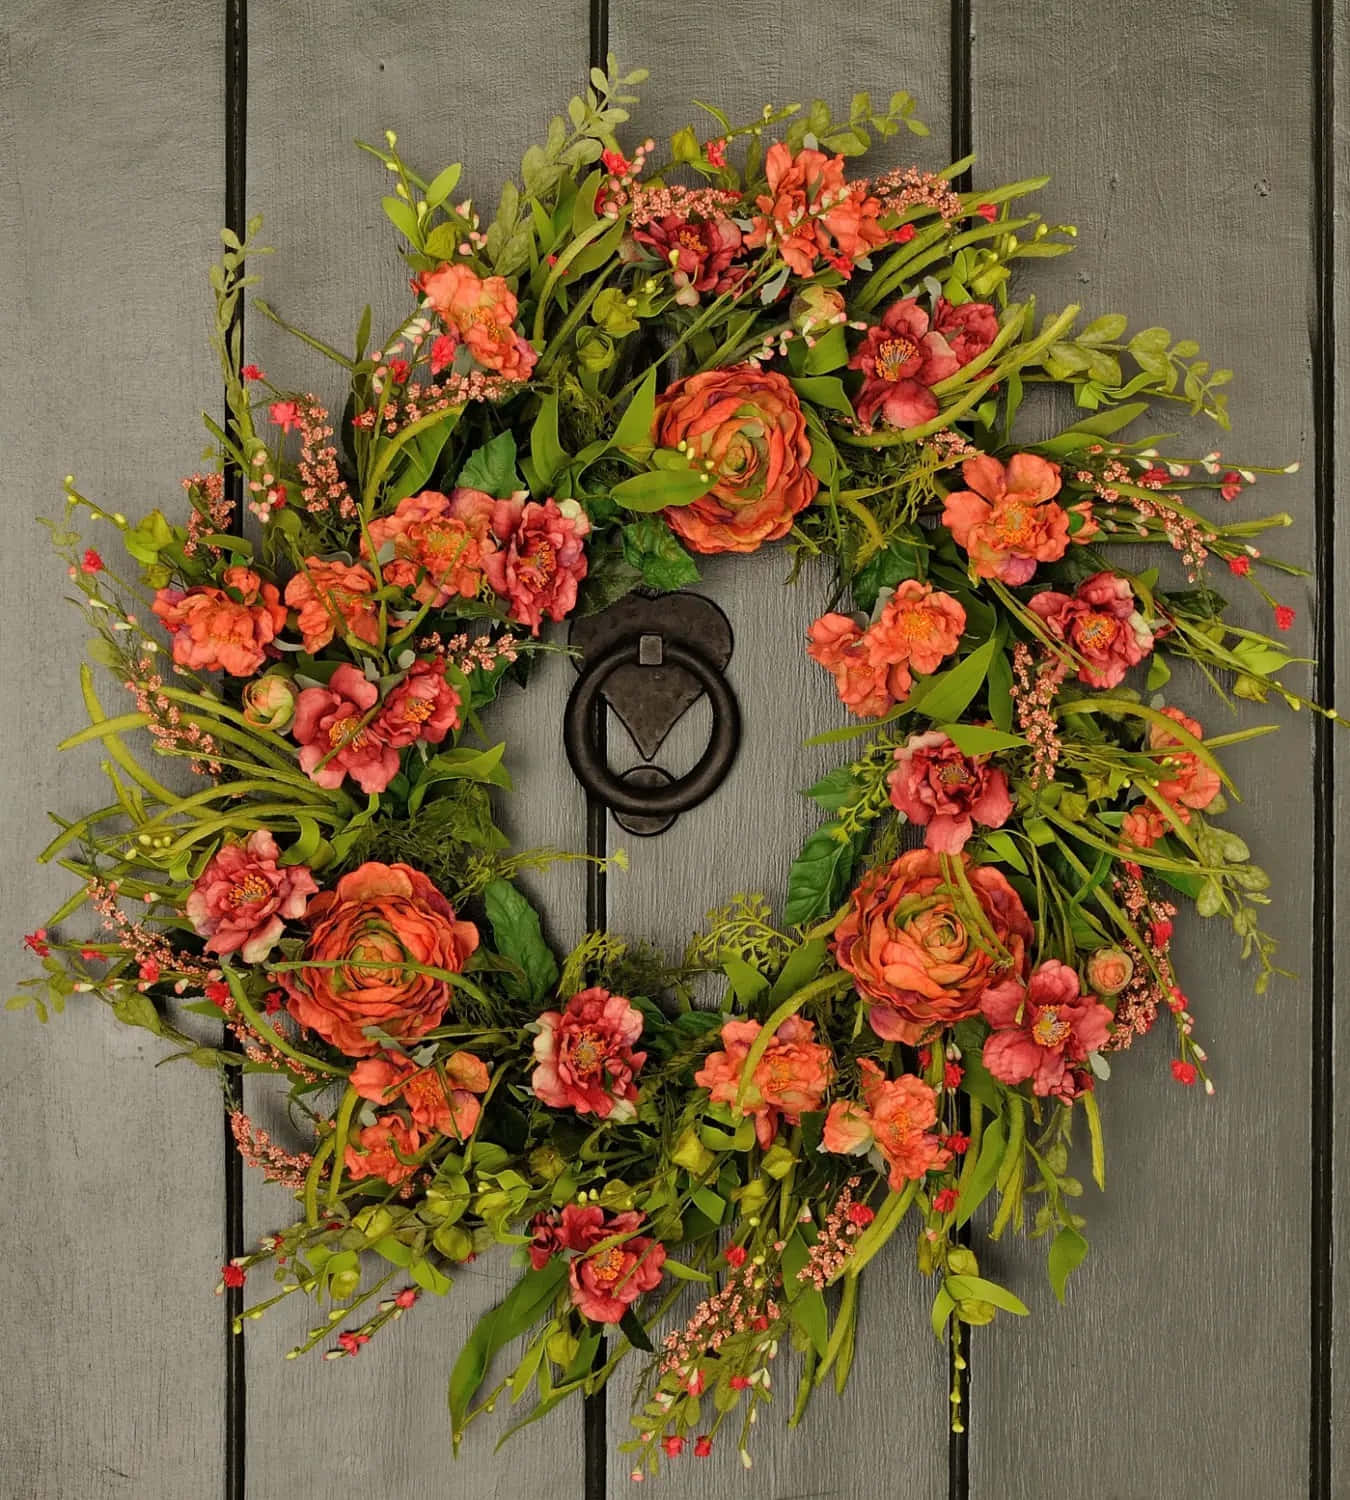 Caption: Colorful Spring Wreath on a White Door Wallpaper